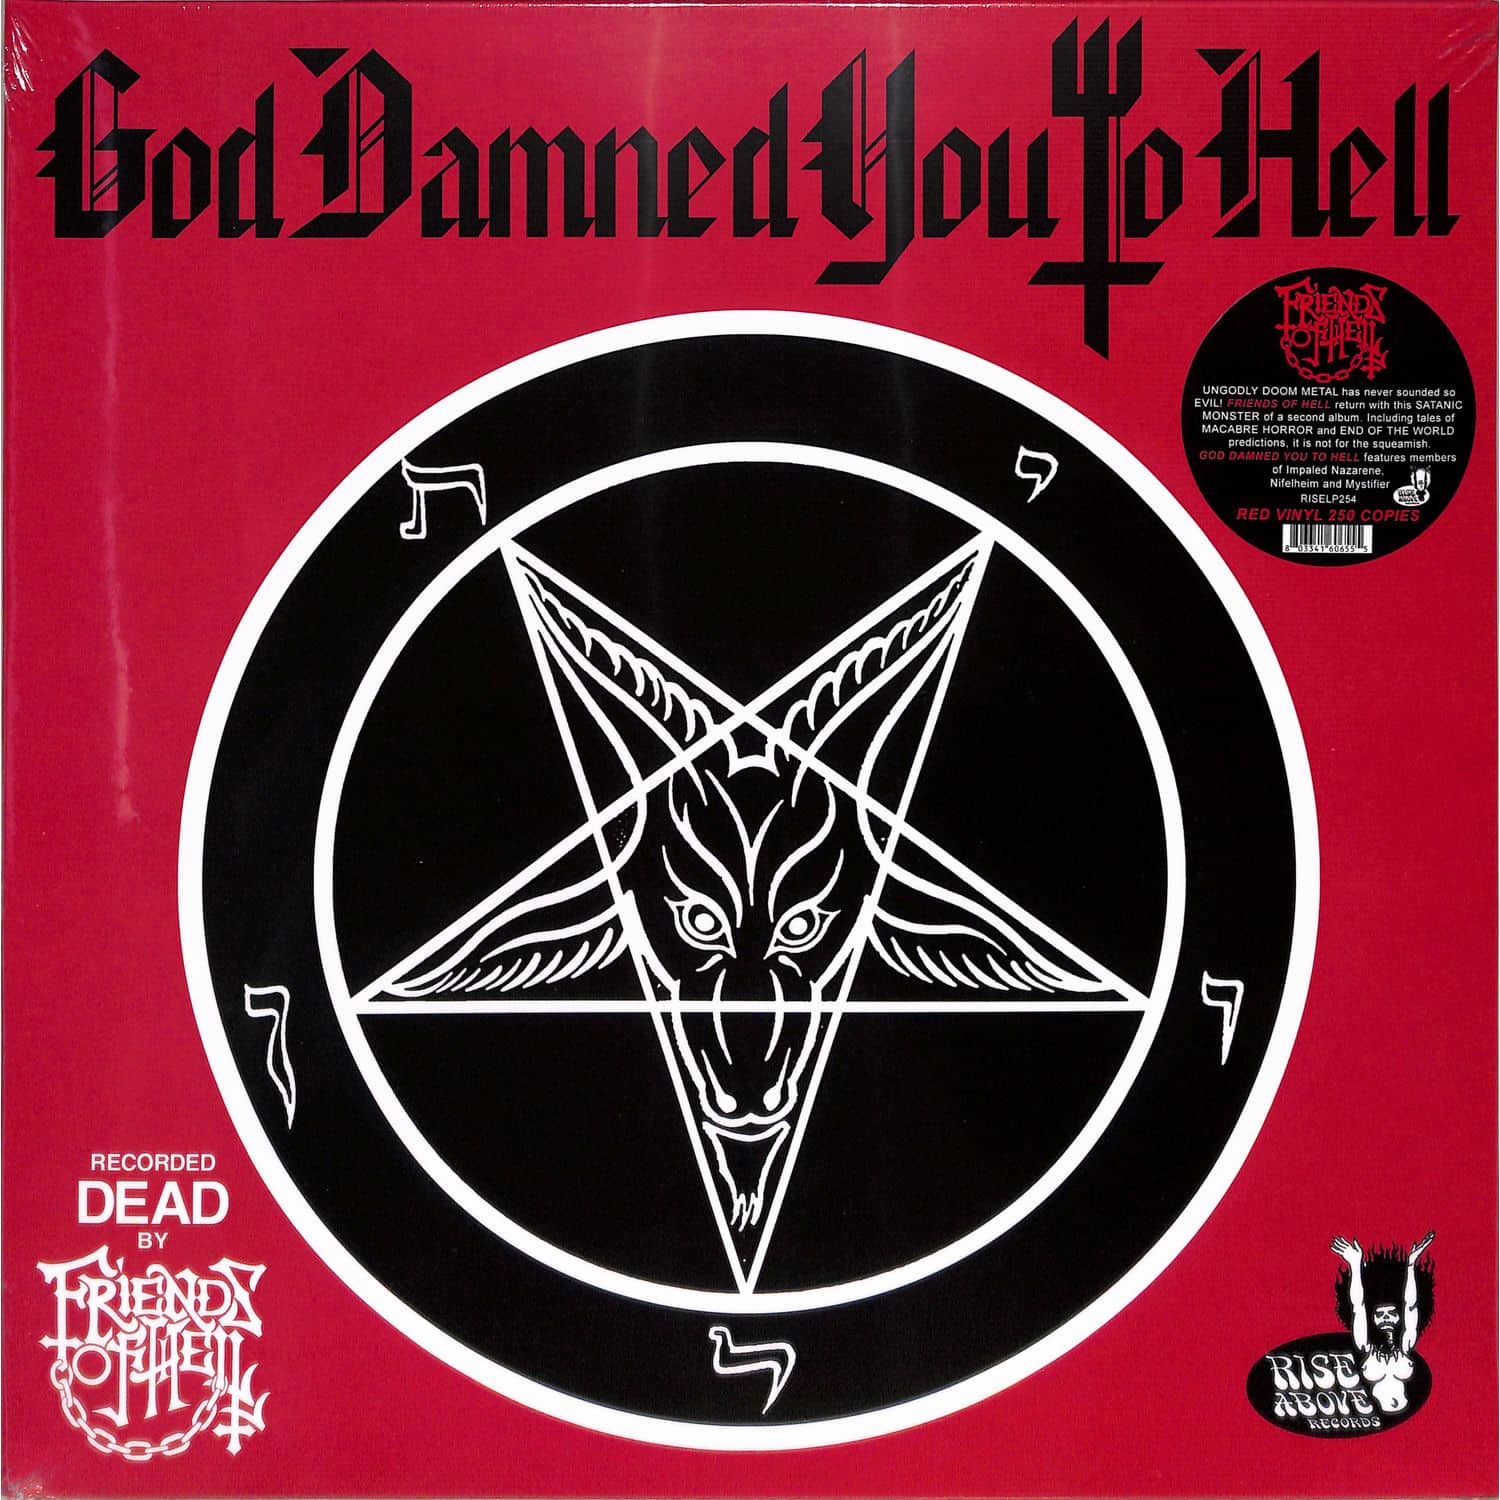 Friends Of Hell - GOD DAMNED YOU TO HELL 